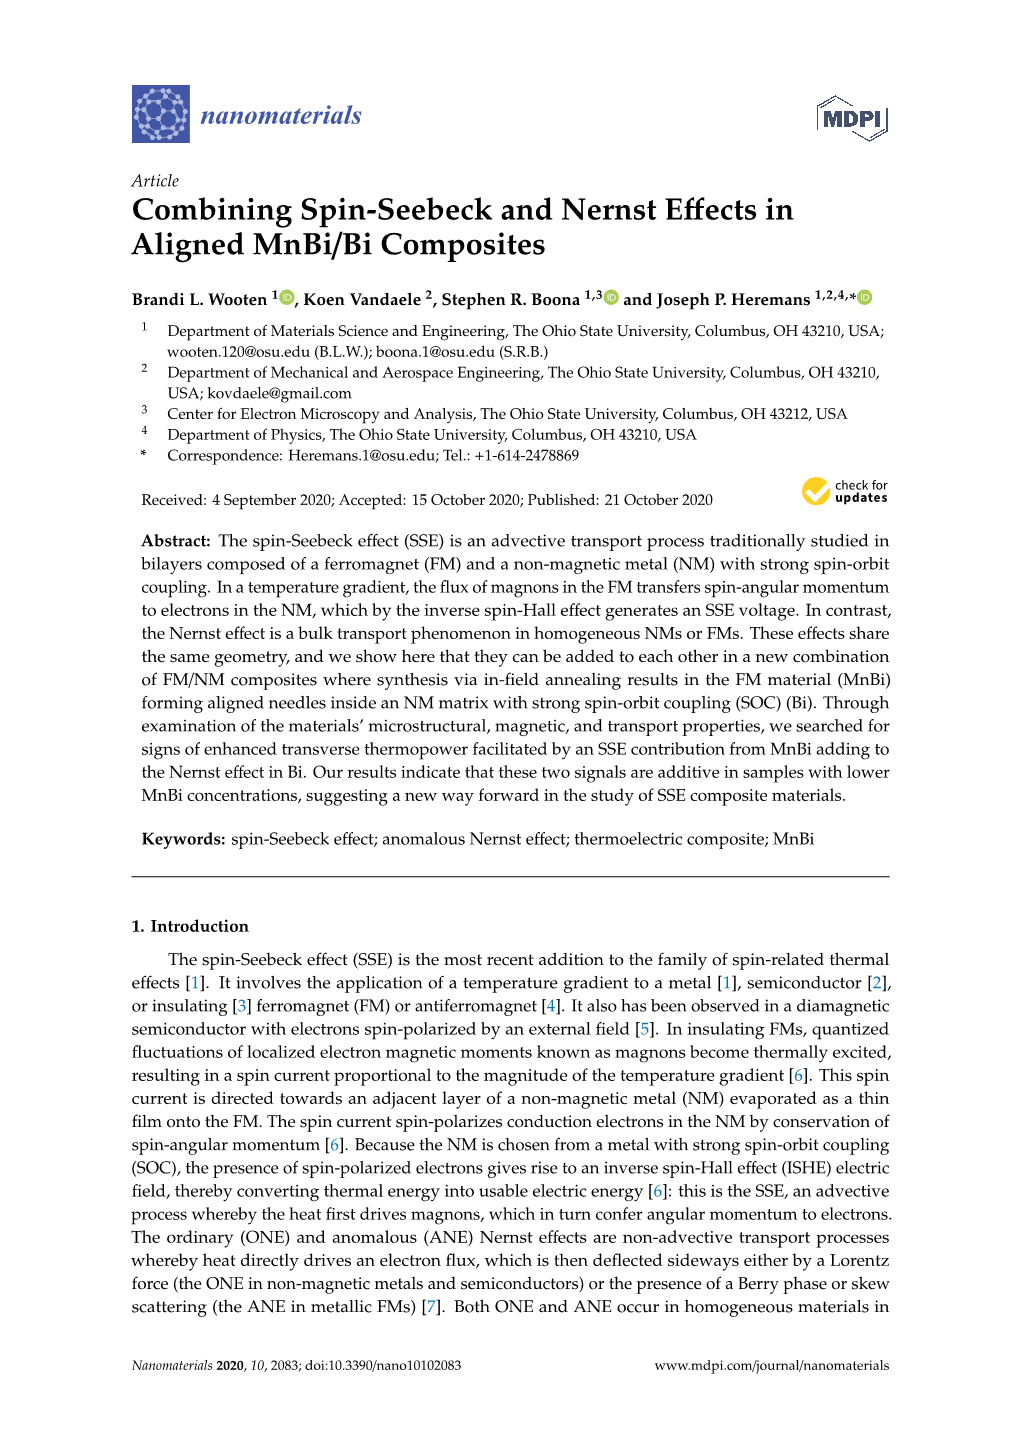 Combining Spin-Seebeck and Nernst Effects in Aligned Mnbi/Bi Composites